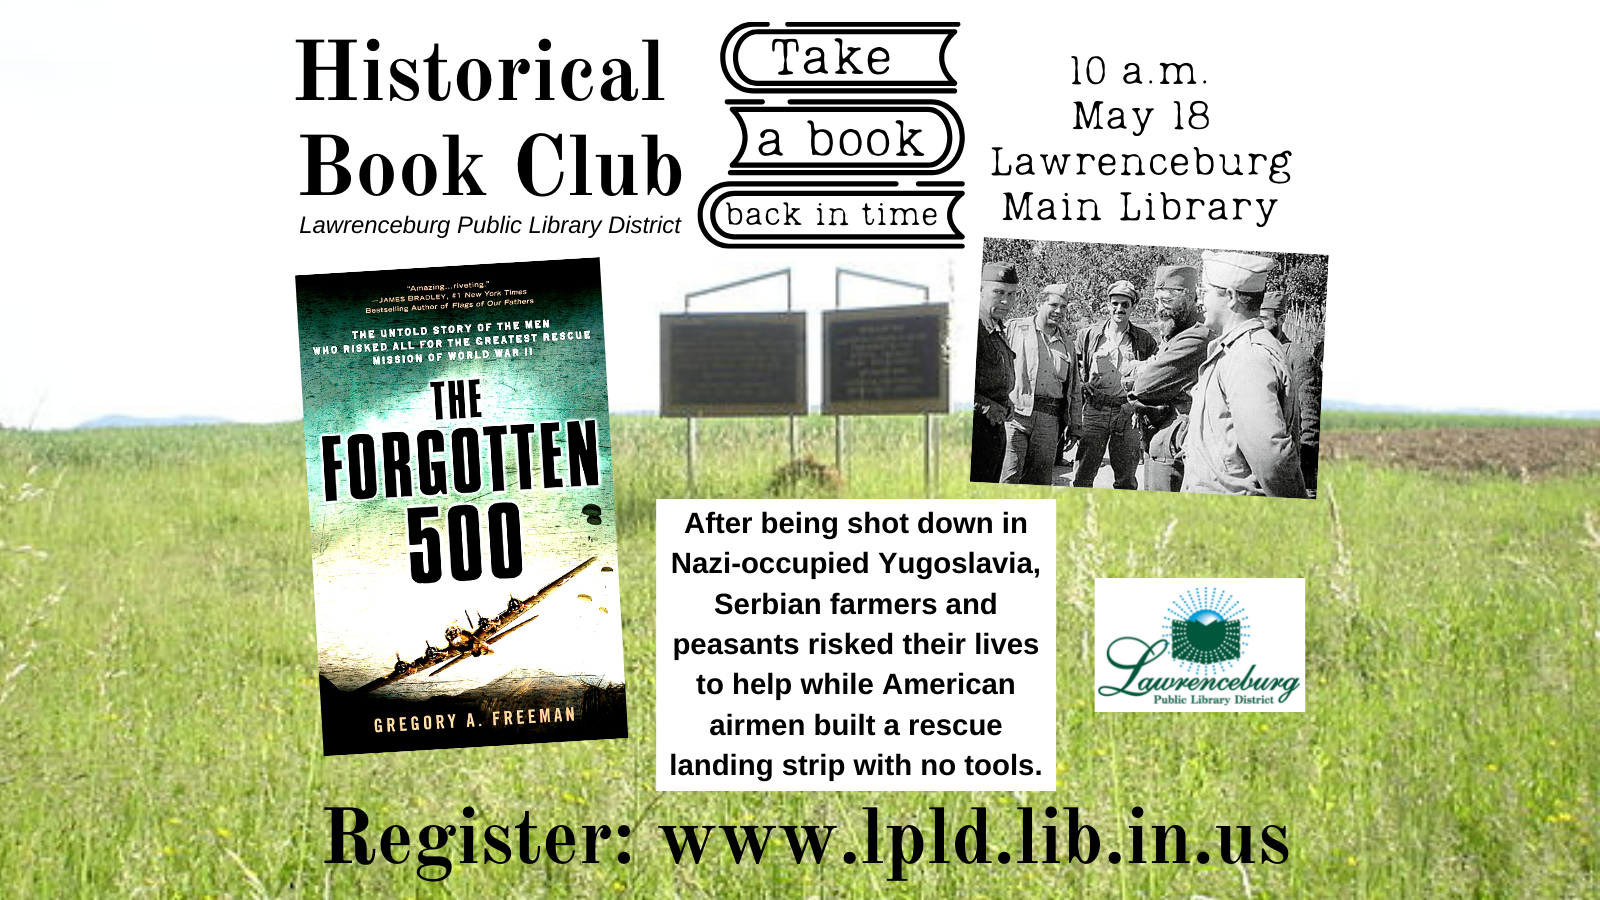 Historical Book Club. 10 a.m. Wednesday, May 18, Lawrenceburg Main Library. Forgotten 500 by Gregory Freeman.